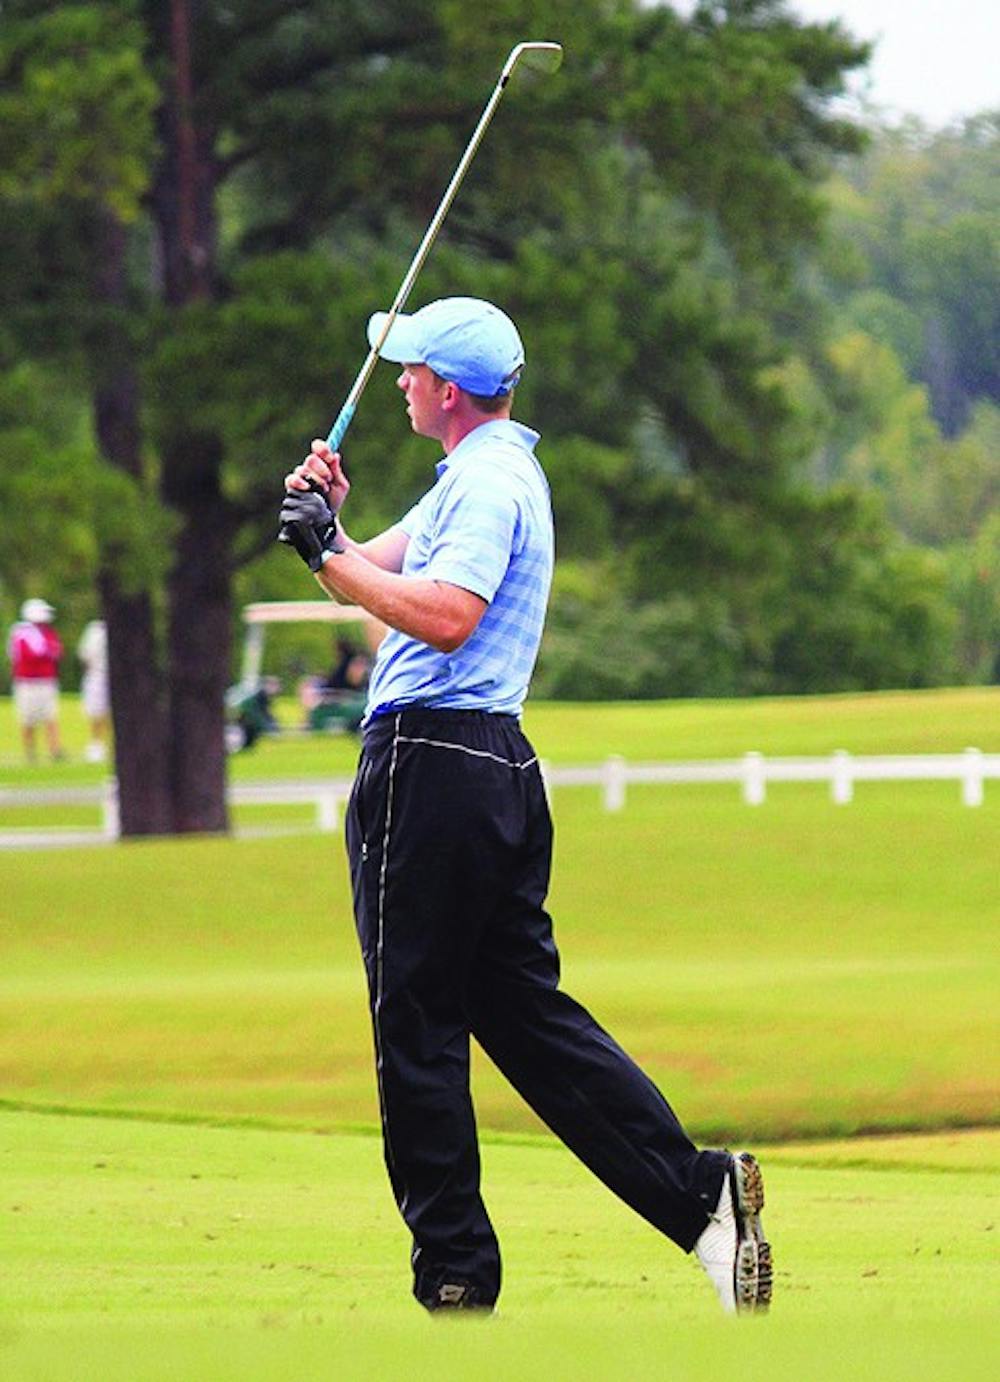 The UNC men's golf team hosted their first home tournament in six years,  Tar Heel Intercollegiate, on  Sept. 15-16.